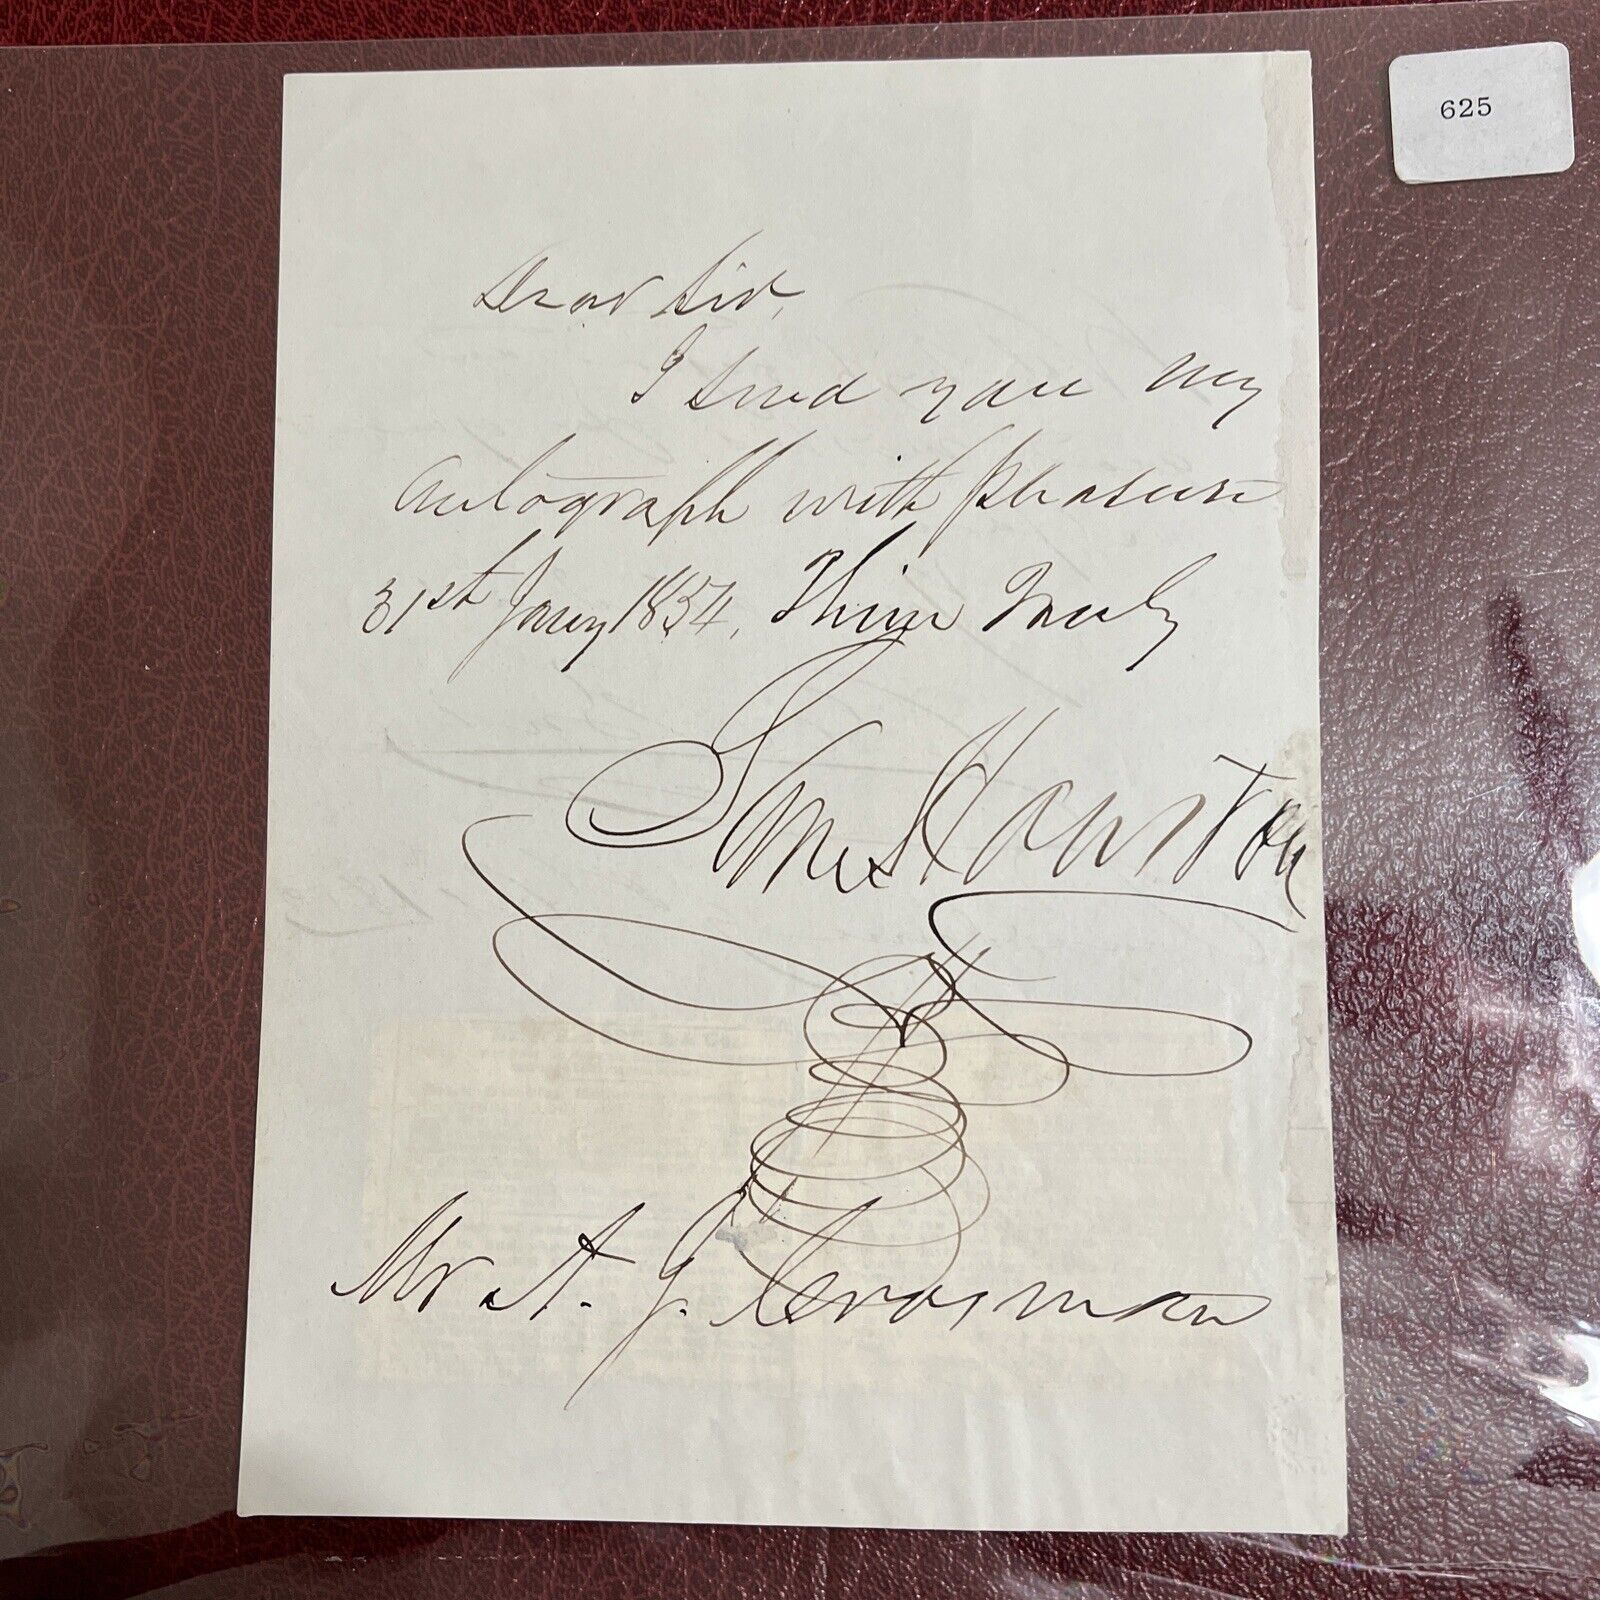 Autograph Note By Sam Houston Large W/ Rubric To A.J. Cramen On Jan. 31, 1854